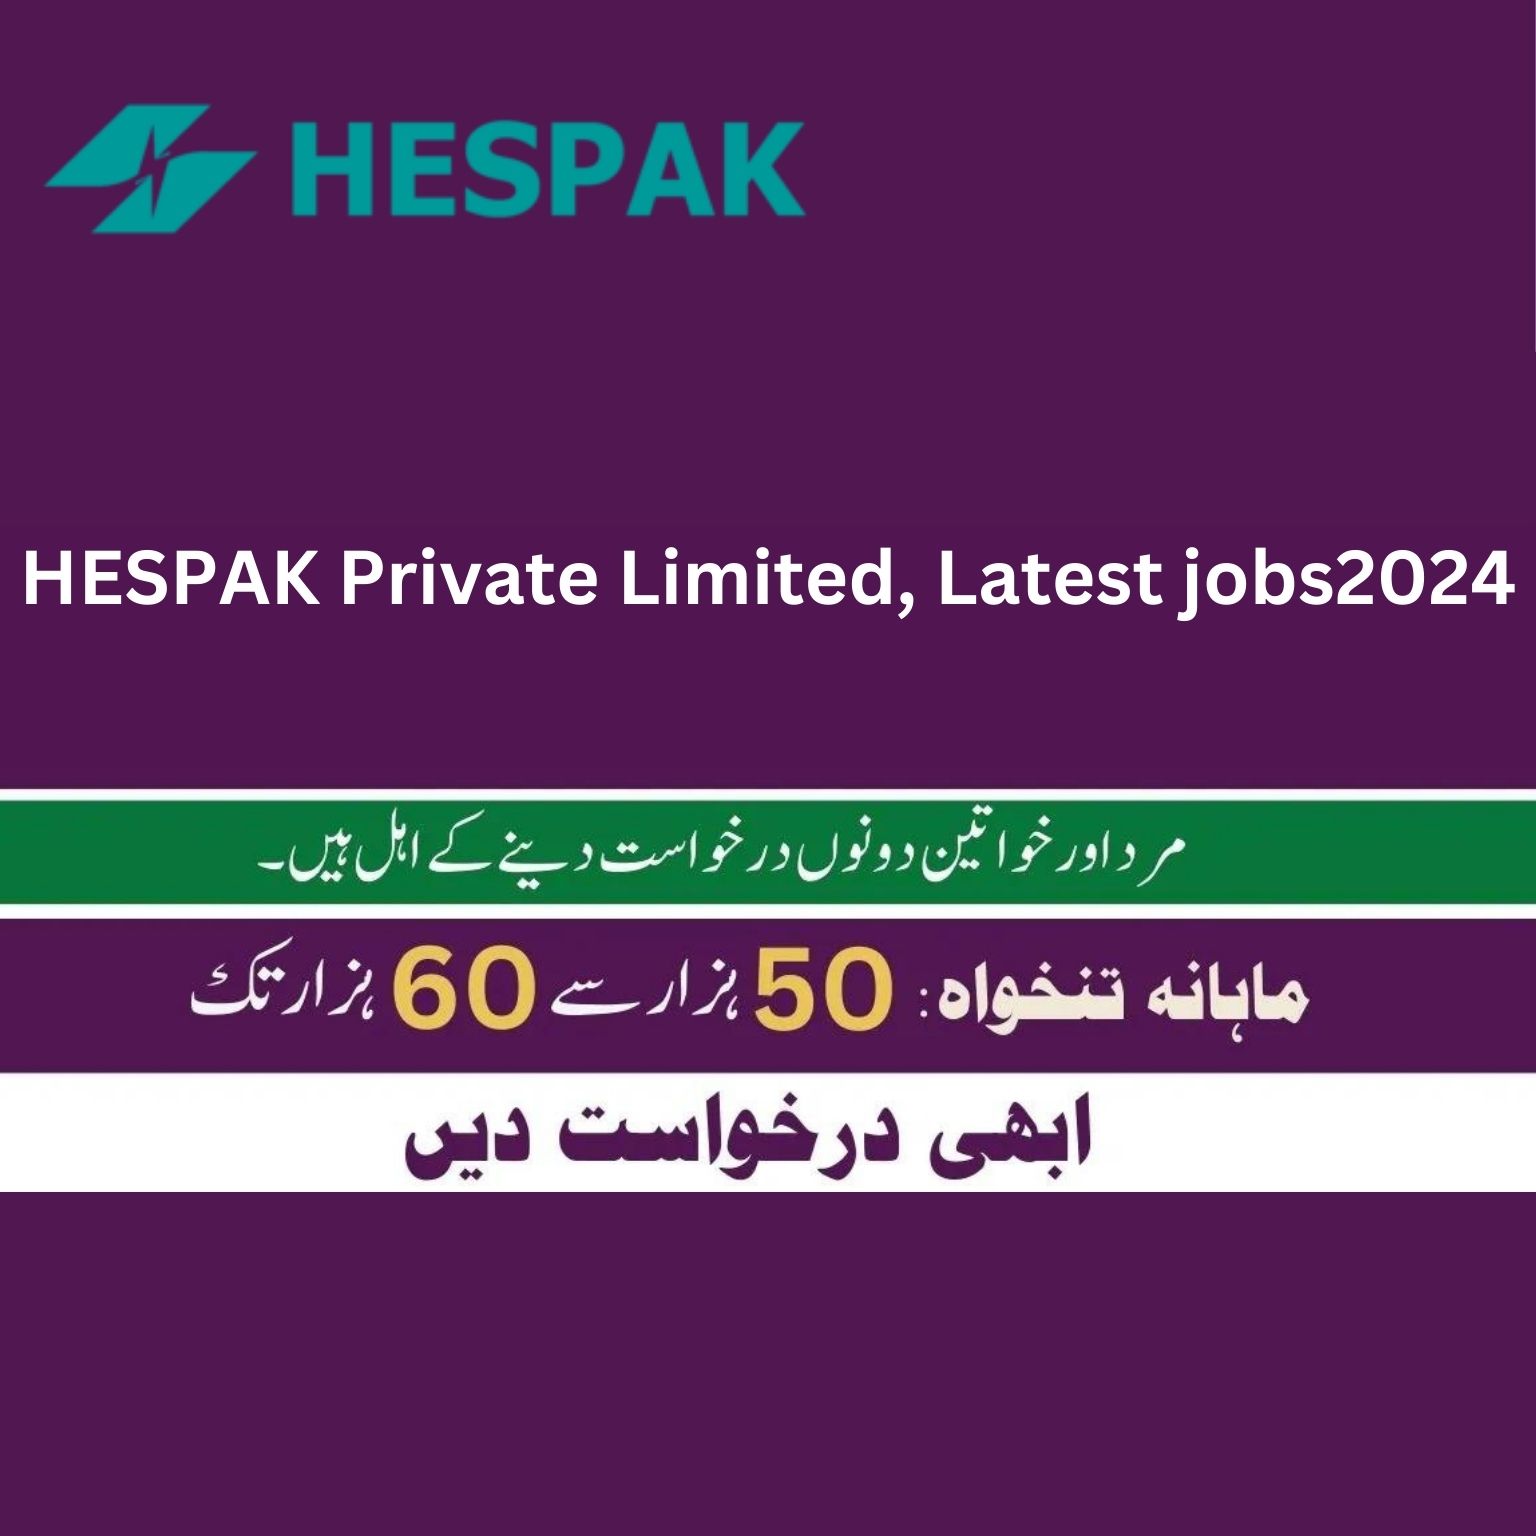 HESPAK Private Limited